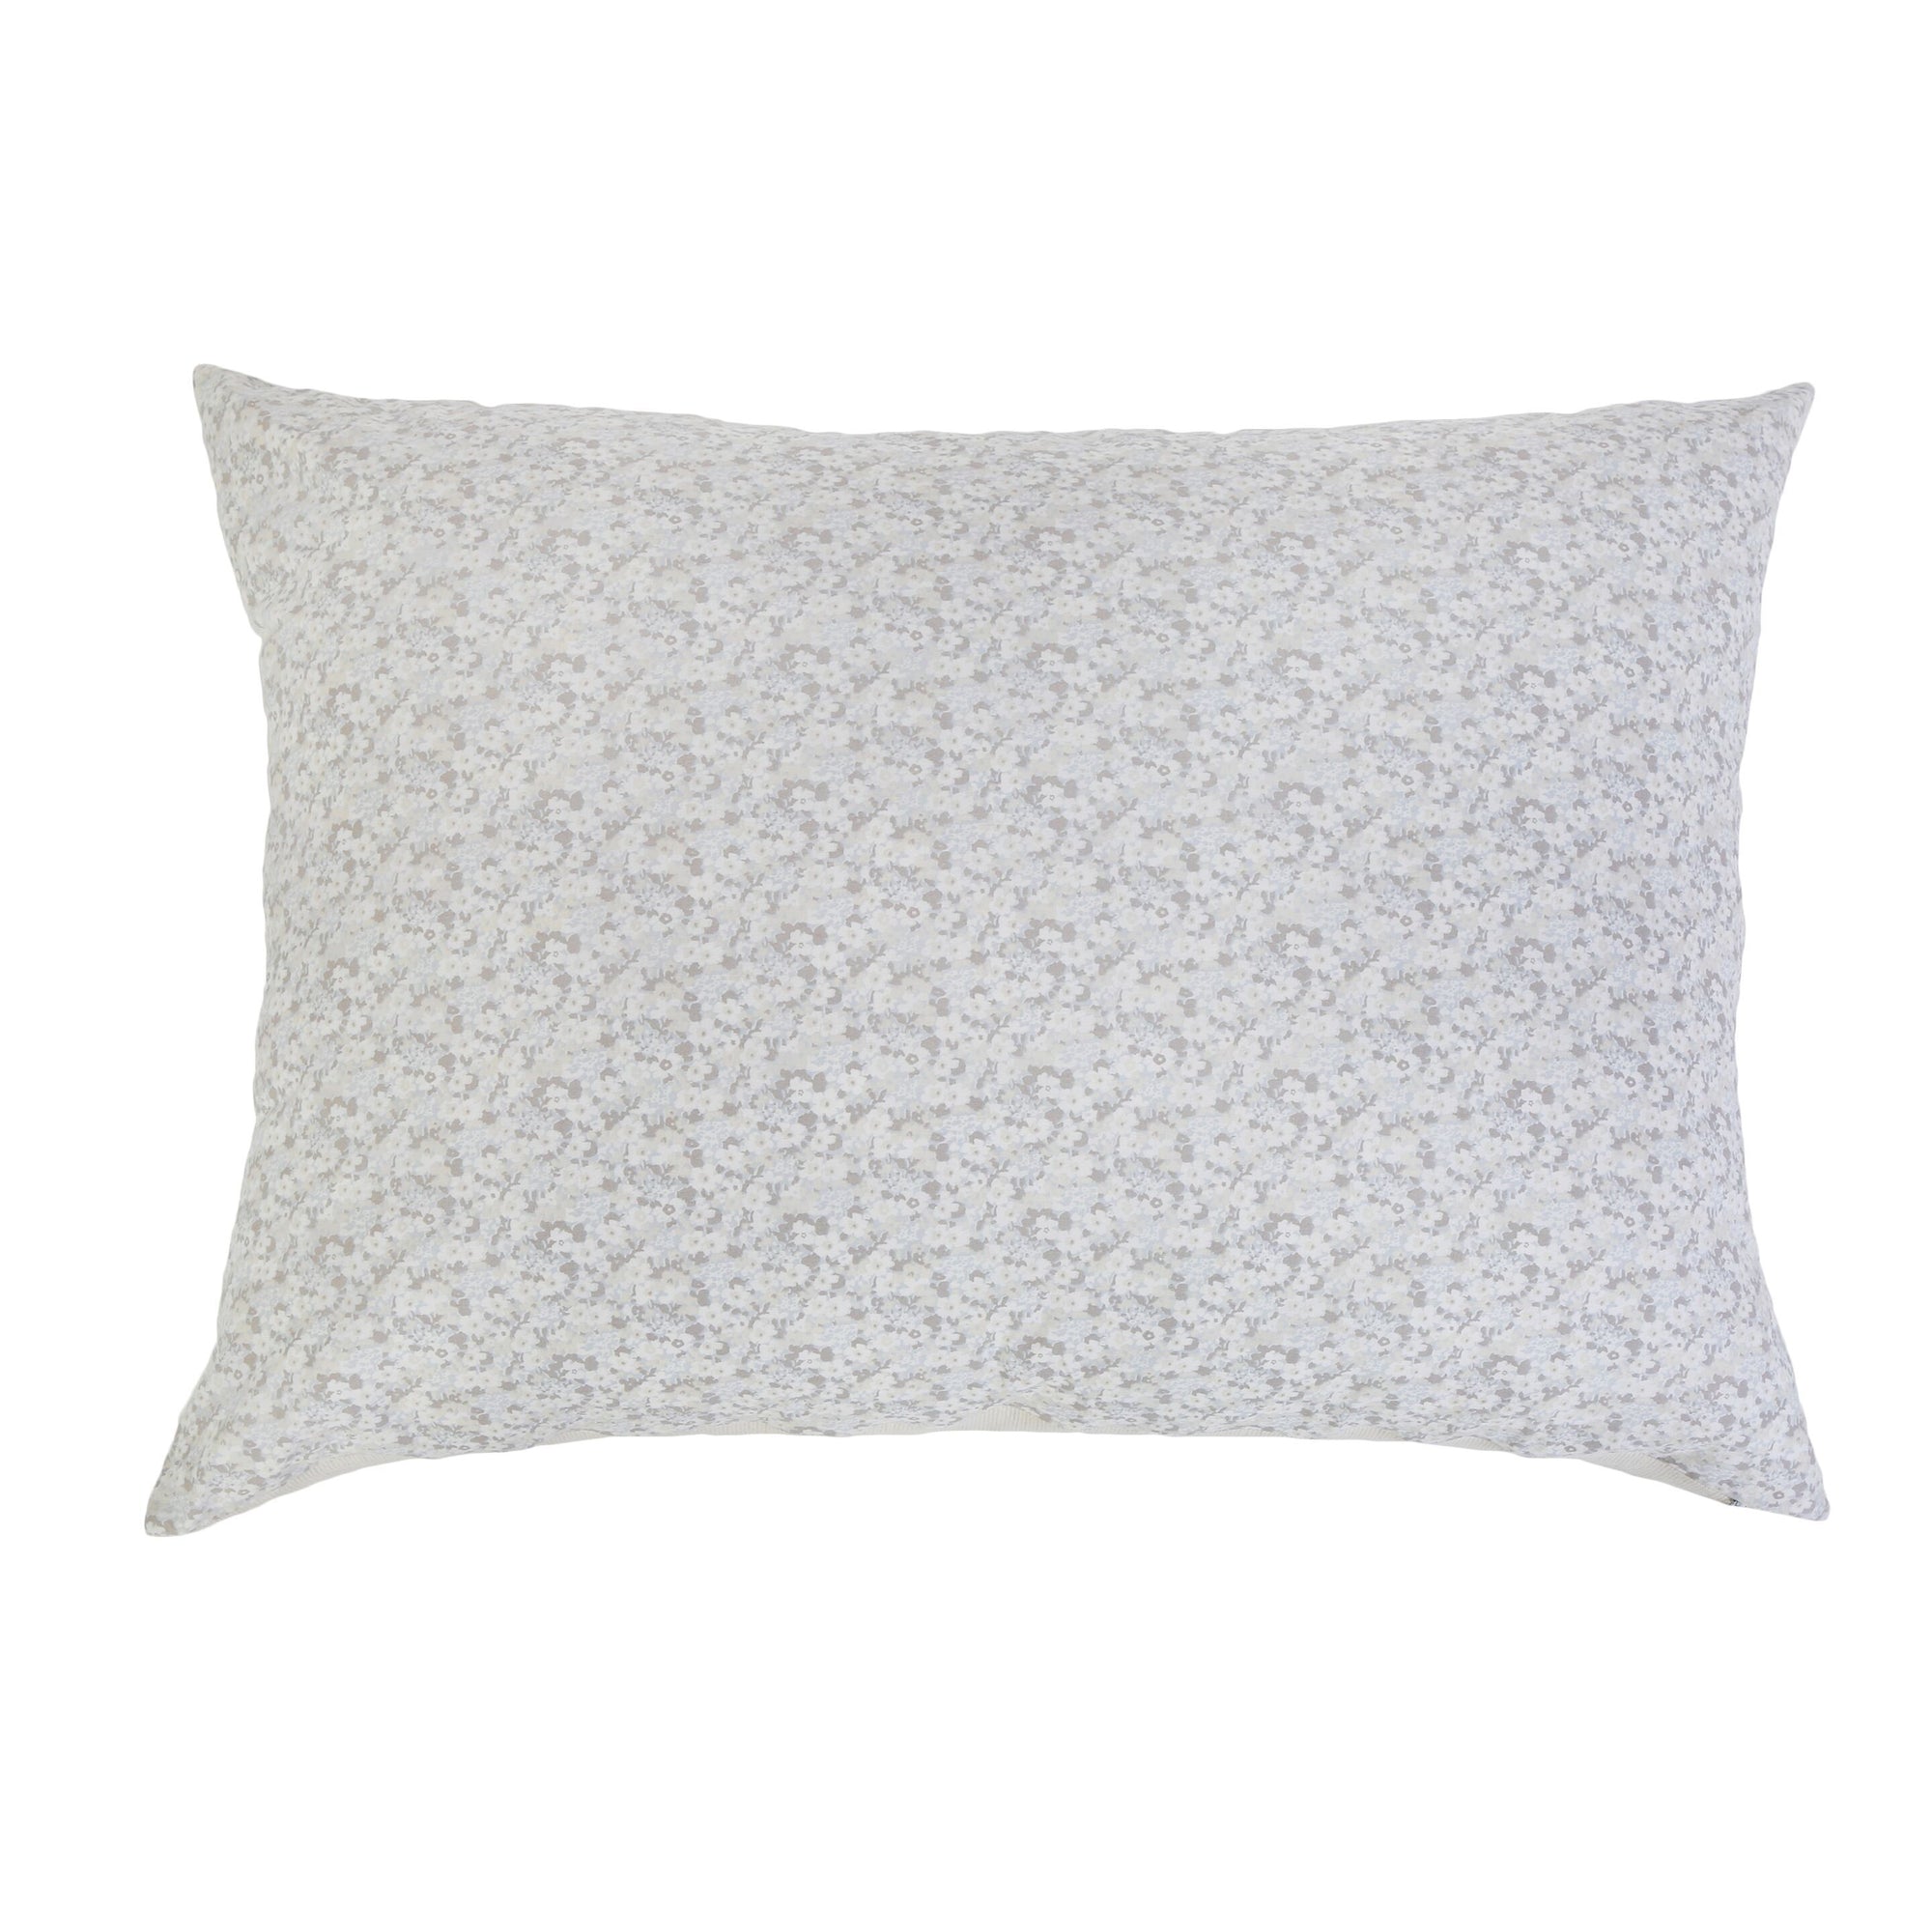 June Big Pillow by Pom Pom at Home | Fig Linens and Home